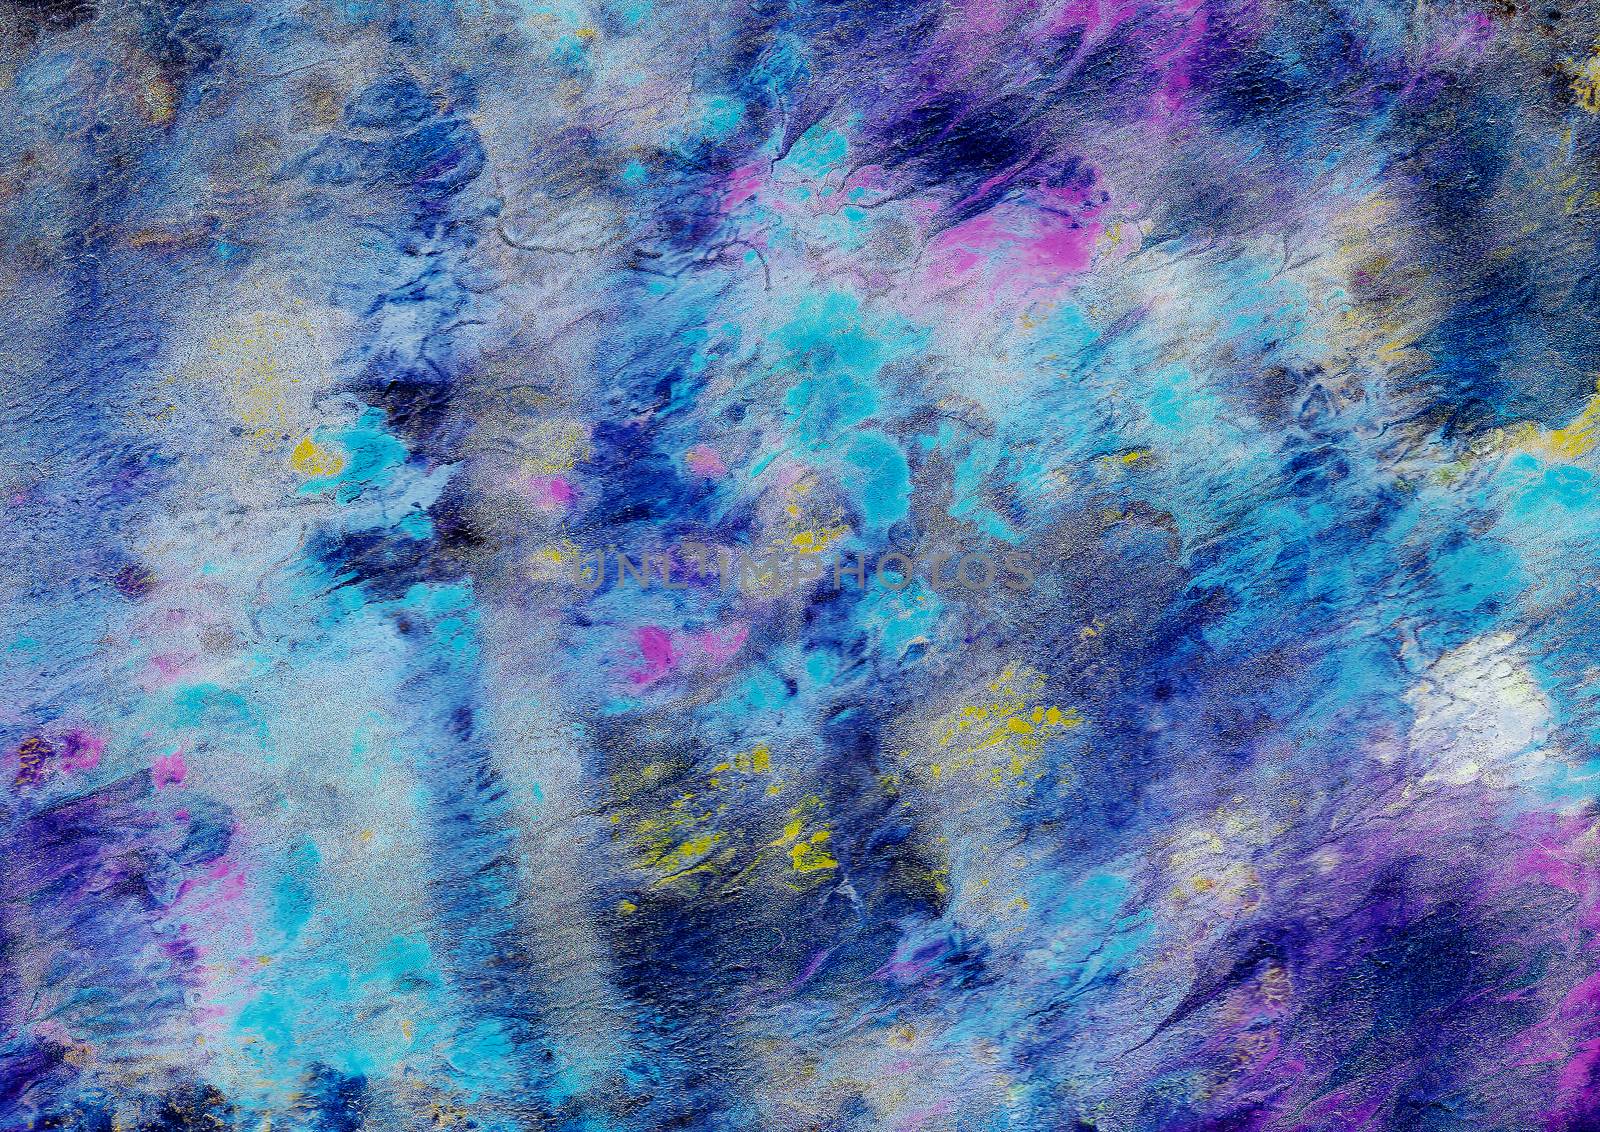 Blue background, hand-painted texture, stroke, splashes, drops of paint, paint smears. Design for backgrounds, wallpapers, covers and packaging.